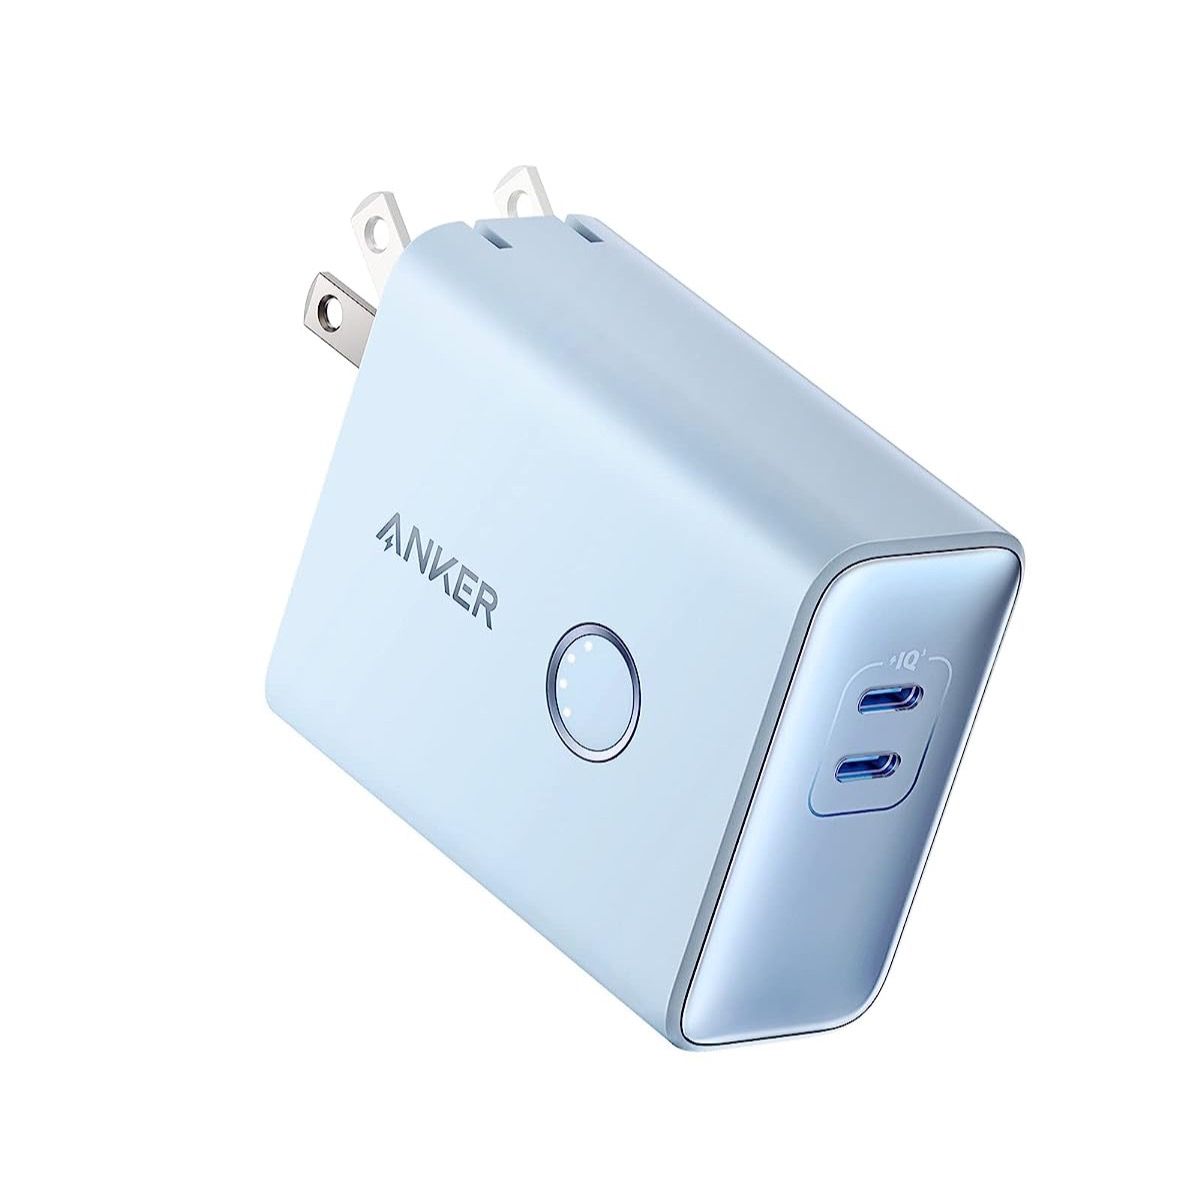 Anker 521 image on a white background